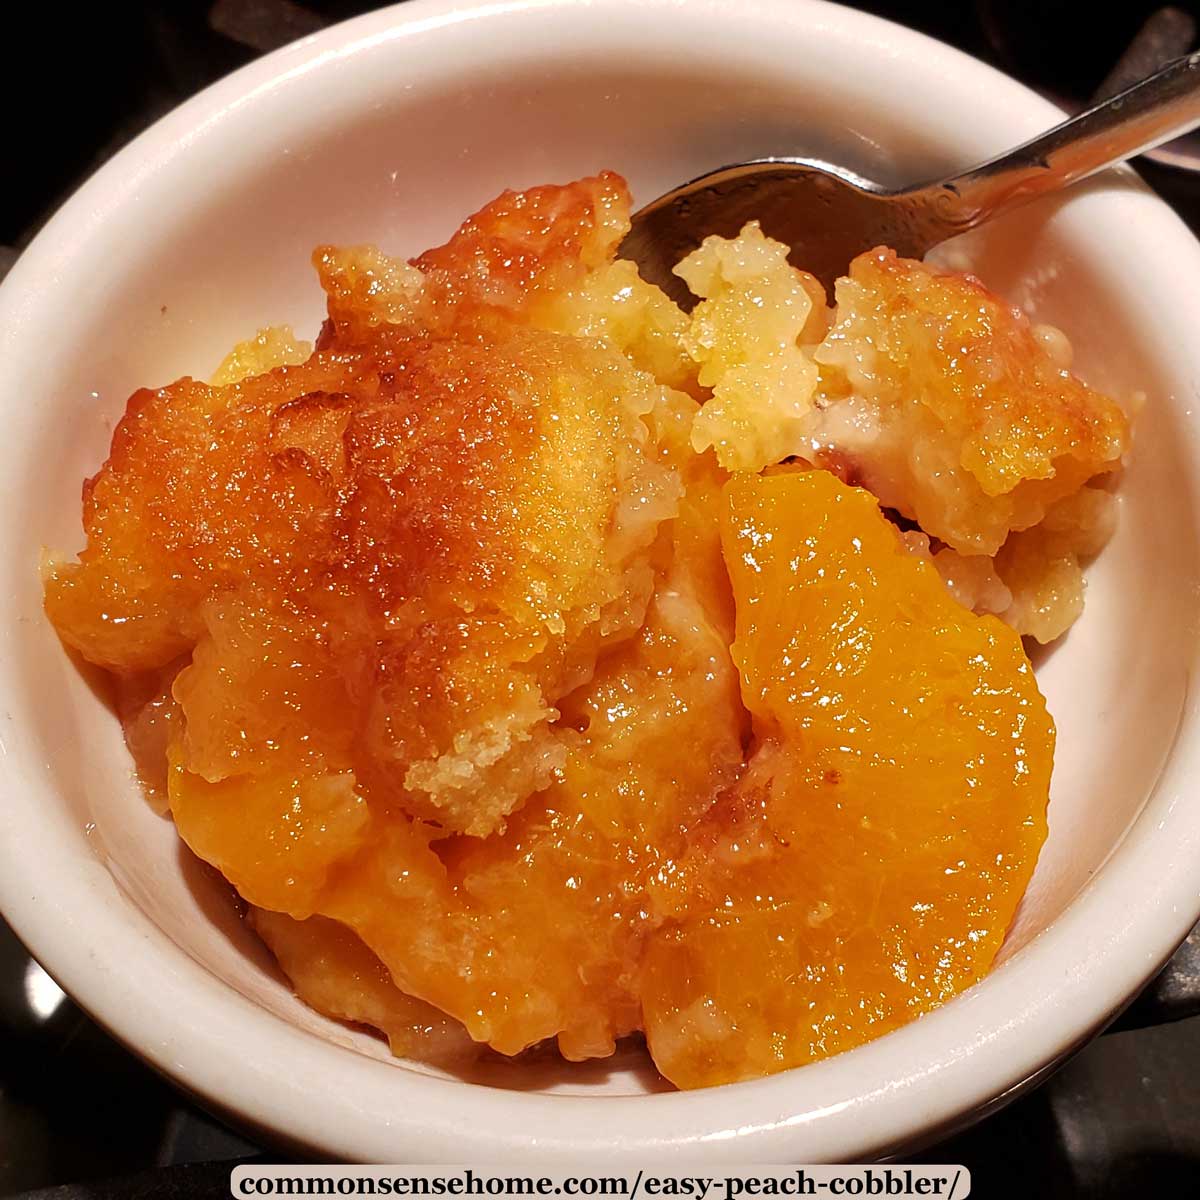 Seriously the best peach cobbler! 